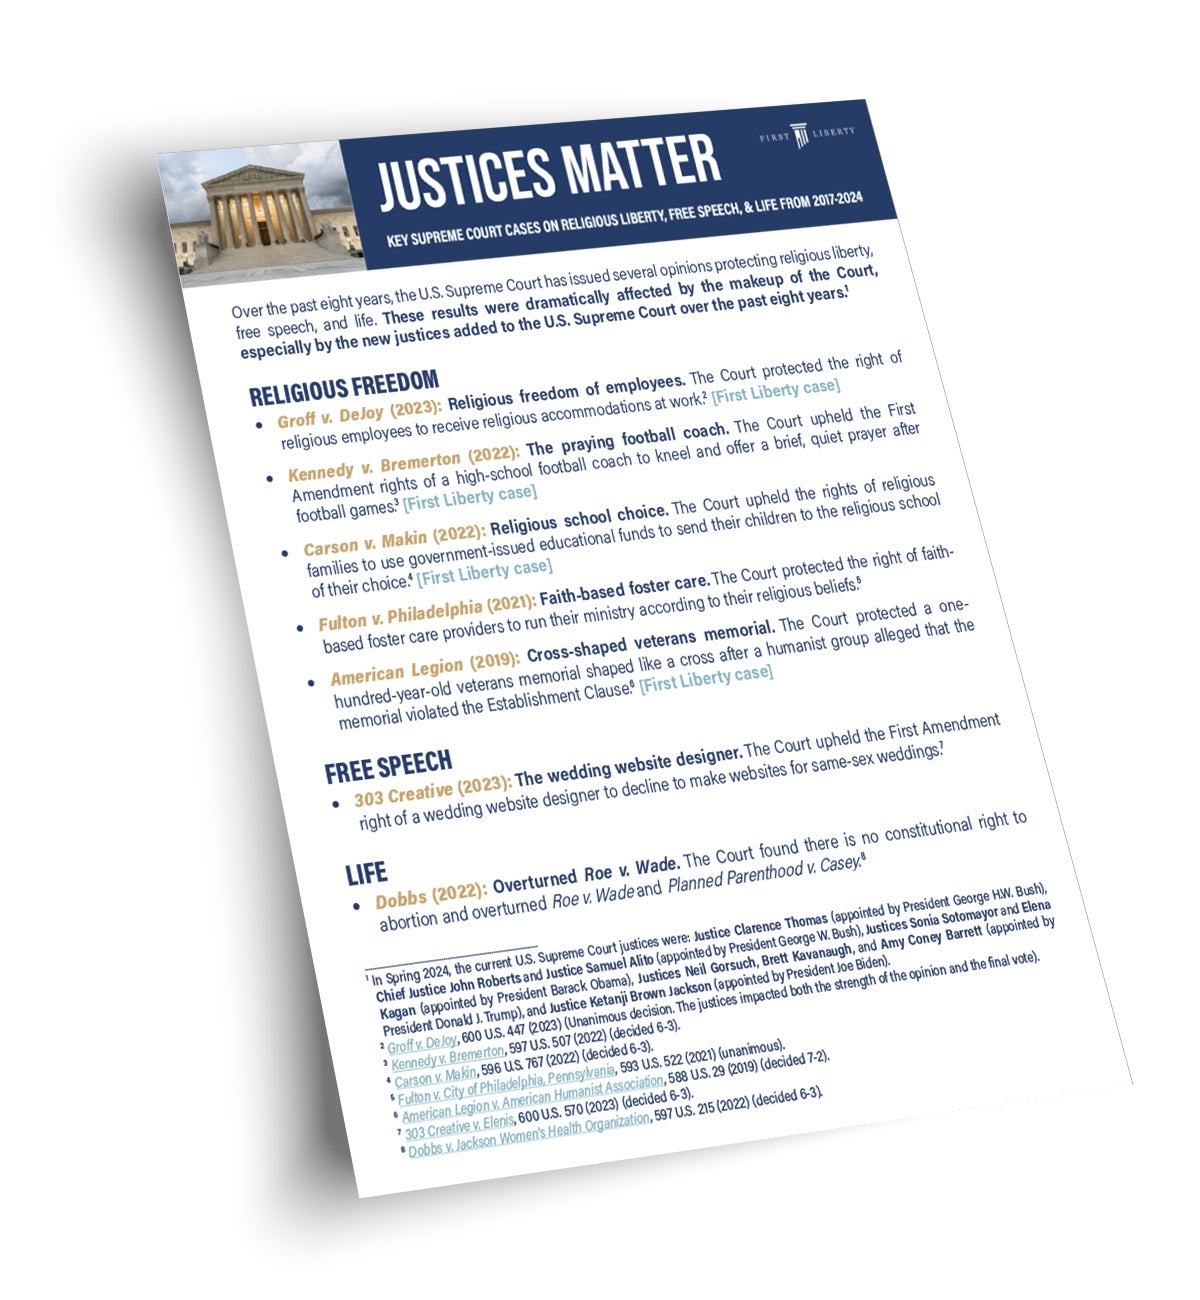 Justices Matter